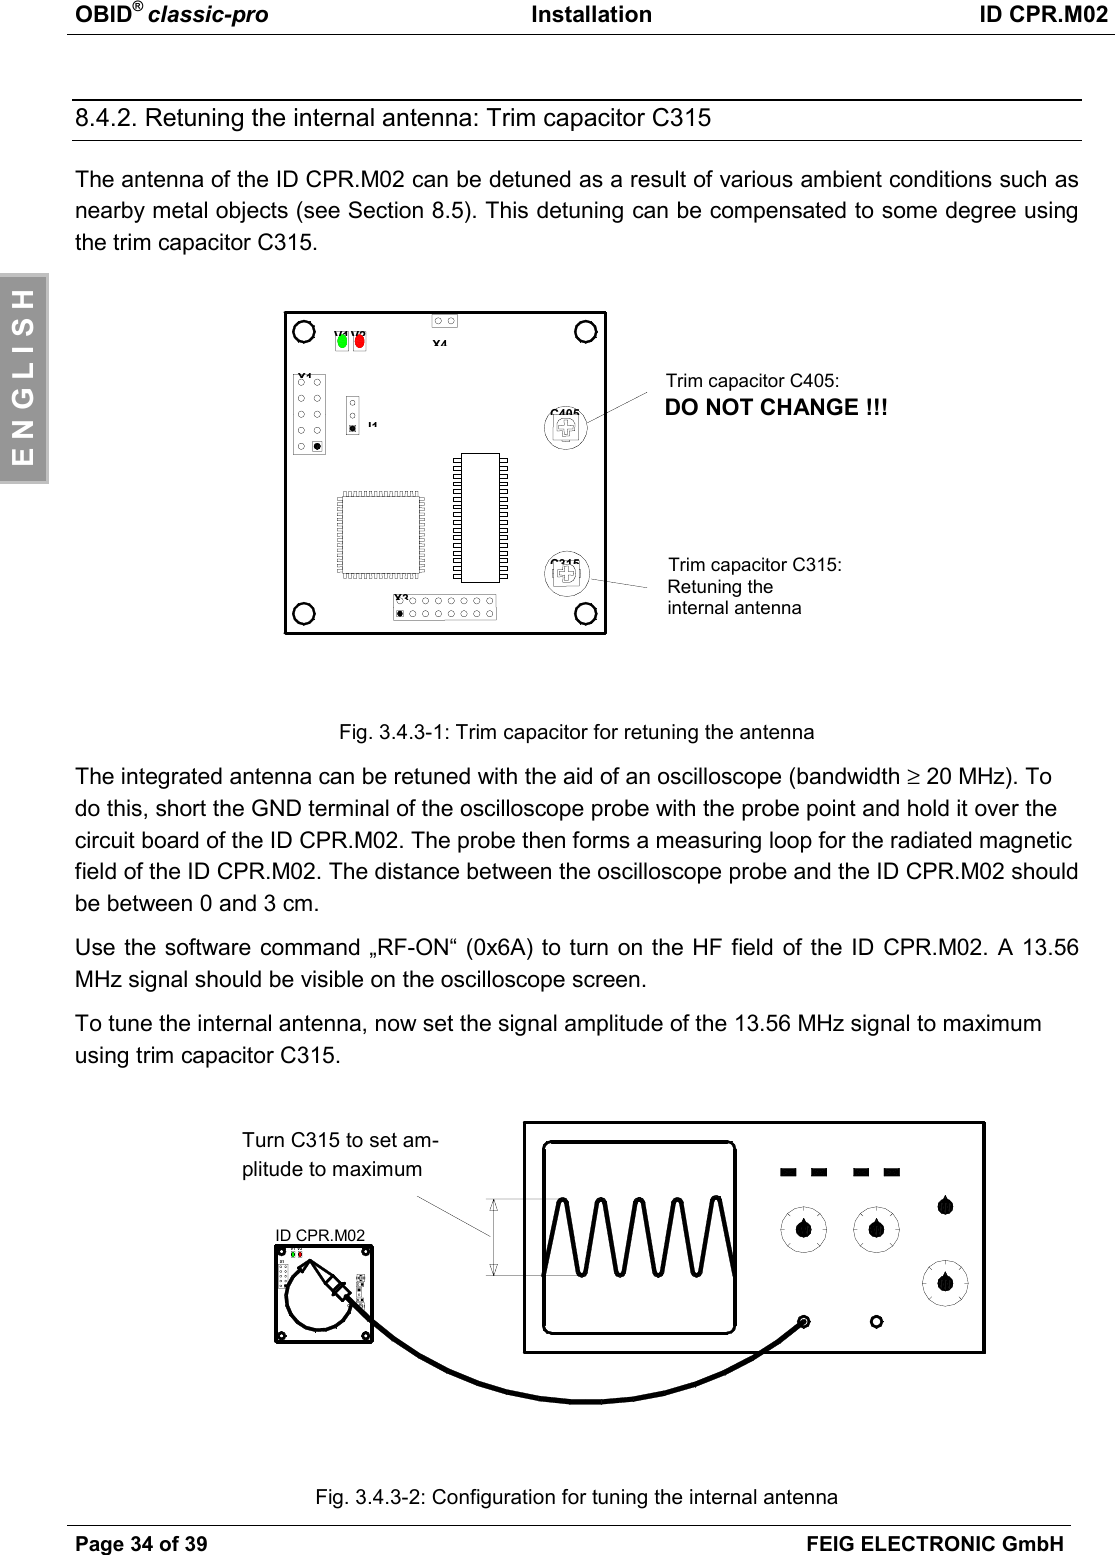 OBID® classic-pro Installation ID CPR.M02Page 34 of 39 FEIG ELECTRONIC GmbHE N G L I S H8.4.2. Retuning the internal antenna: Trim capacitor C315The antenna of the ID CPR.M02 can be detuned as a result of various ambient conditions such asnearby metal objects (see Section 8.5). This detuning can be compensated to some degree usingthe trim capacitor C315.Fig. 3.4.3-1: Trim capacitor for retuning the antennaThe integrated antenna can be retuned with the aid of an oscilloscope (bandwidth ≥ 20 MHz). Todo this, short the GND terminal of the oscilloscope probe with the probe point and hold it over thecircuit board of the ID CPR.M02. The probe then forms a measuring loop for the radiated magneticfield of the ID CPR.M02. The distance between the oscilloscope probe and the ID CPR.M02 shouldbe between 0 and 3 cm.Use the software command „RF-ON“ (0x6A) to turn on the HF field of the ID CPR.M02. A 13.56MHz signal should be visible on the oscilloscope screen.To tune the internal antenna, now set the signal amplitude of the 13.56 MHz signal to maximumusing trim capacitor C315.Fig. 3.4.3-2: Configuration for tuning the internal antennaC405Trim capacitor C405:DO NOT CHANGE !!!Trim capacitor C315:Retuning theinternal antennaX3X4X1J1V2V1C315ID CPR.M02Mit C315 Signalamplitude auf Maximum drehenV1 V2X1C65Turn C315 to set am-plitude to maximum